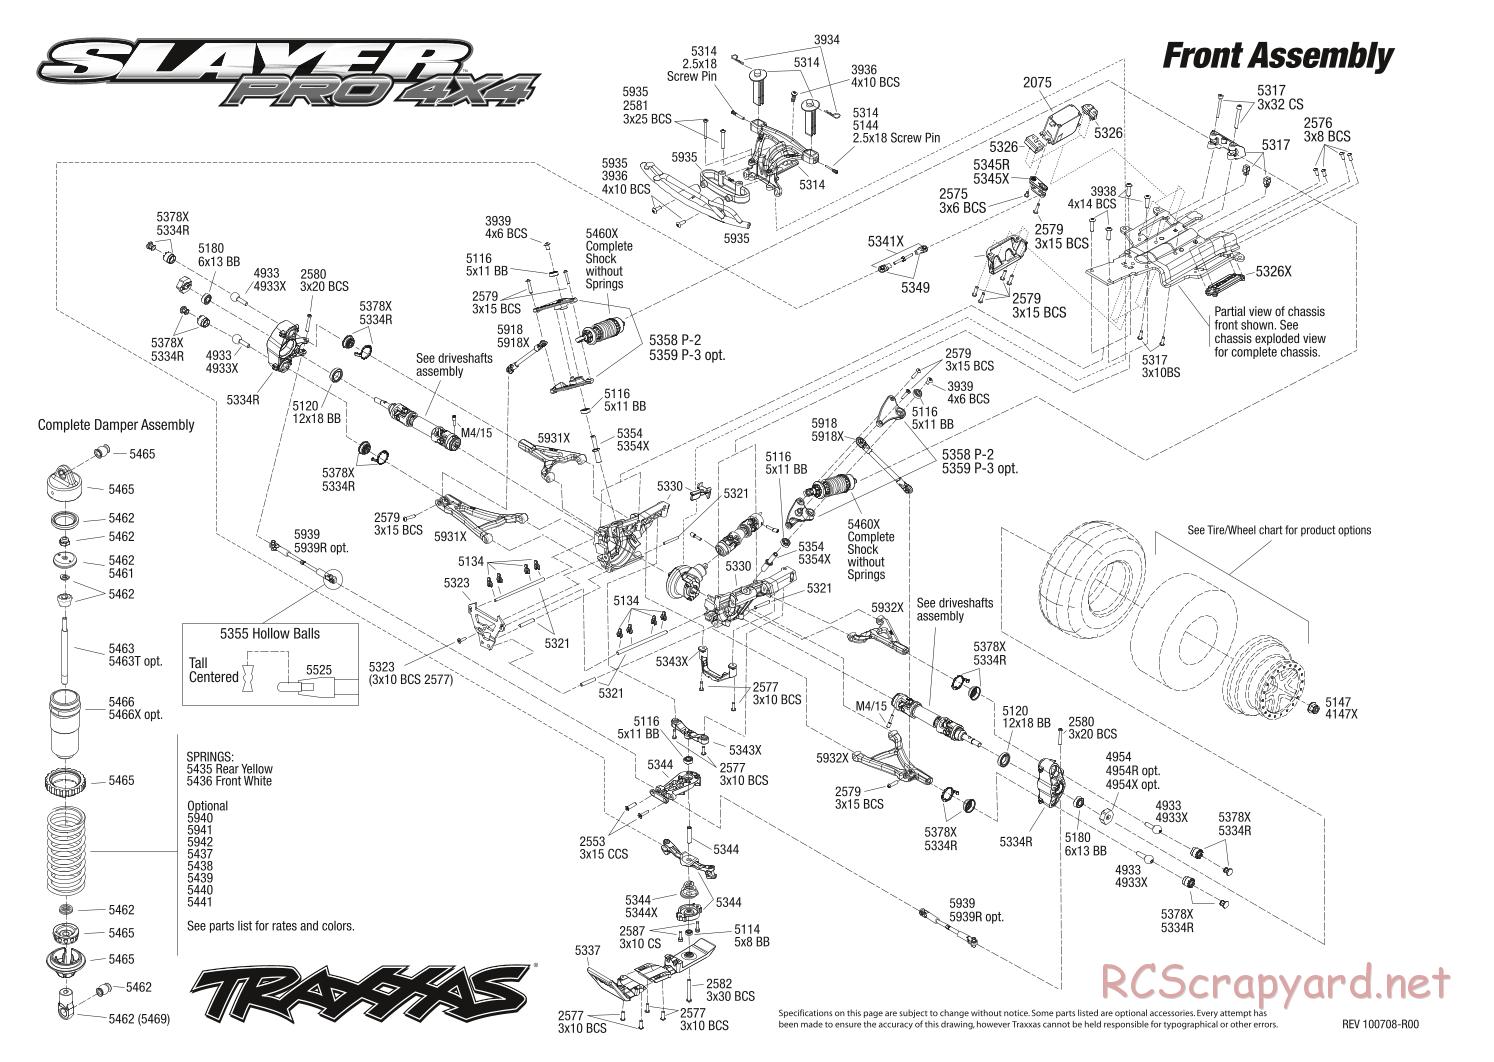 Traxxas - Slayer Pro 4x4 - Exploded Views - Page 3